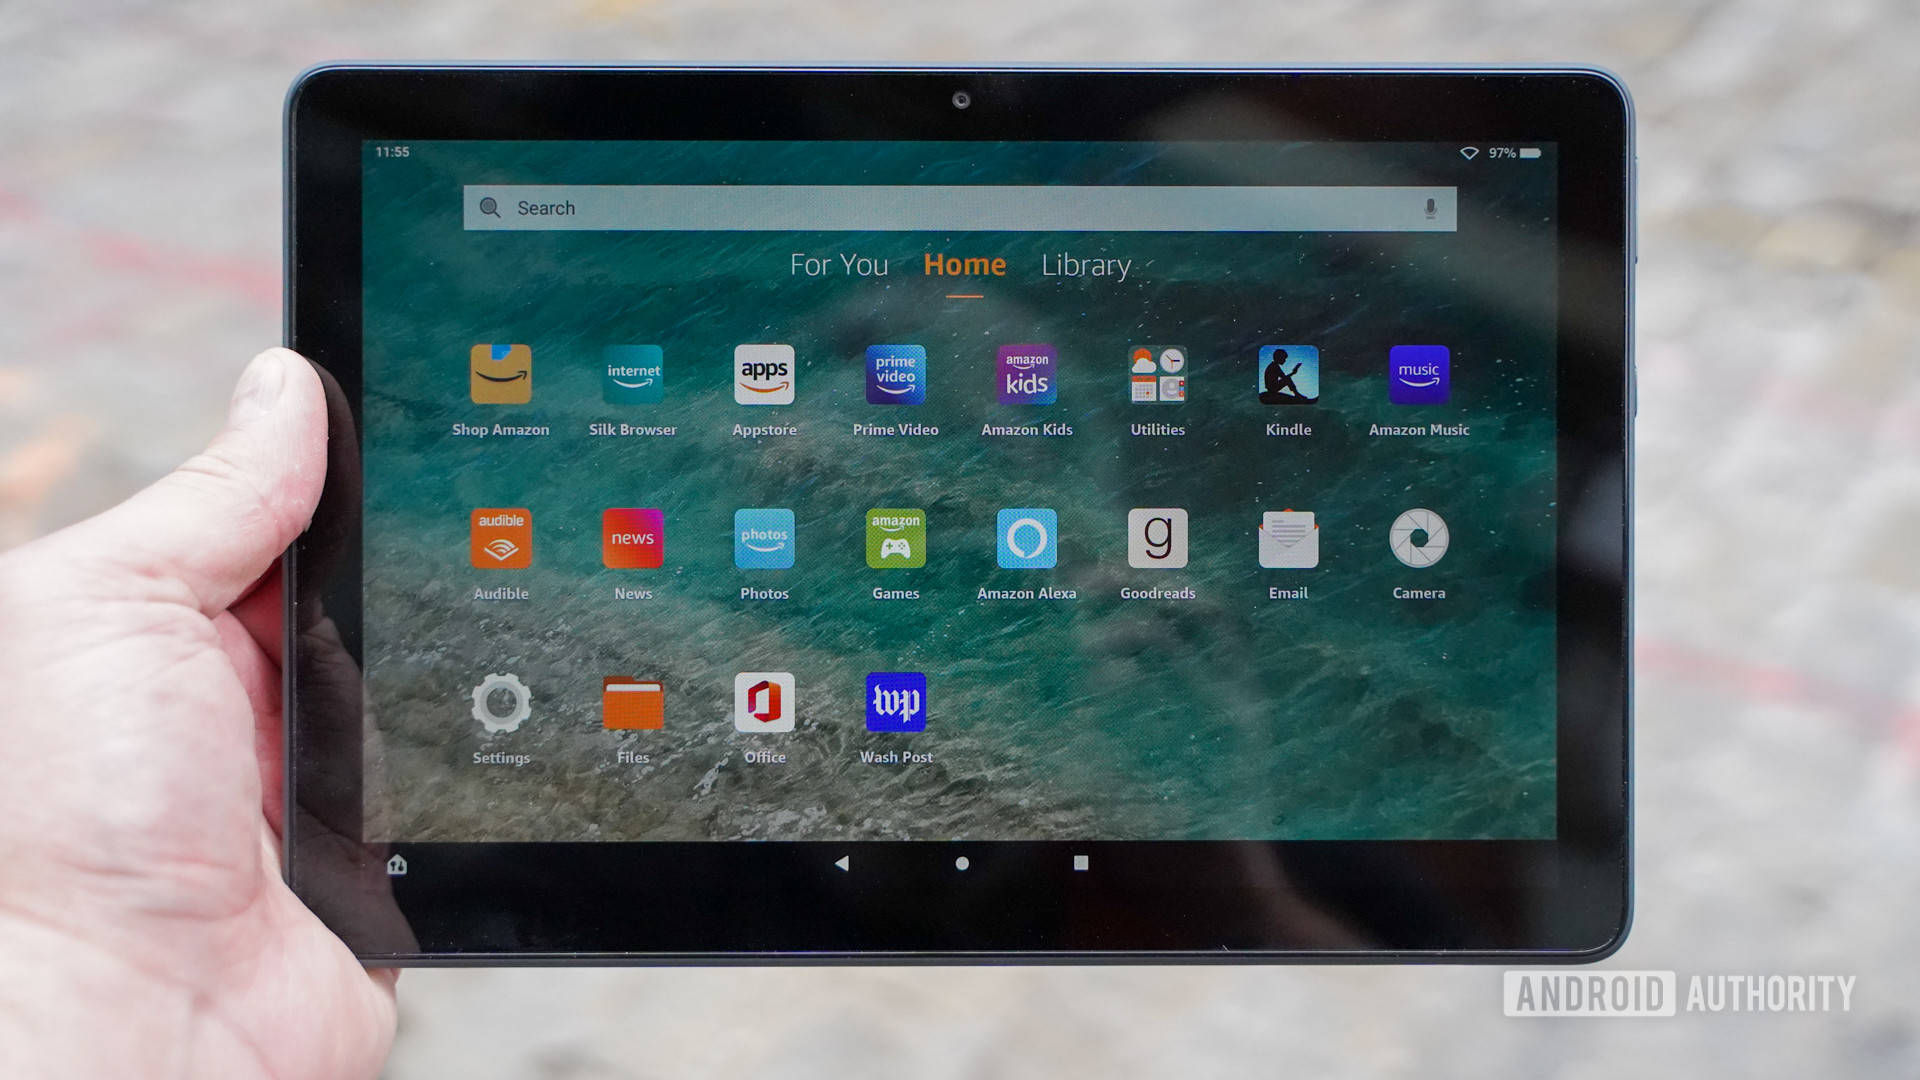 The Amazon Fire HD 10 Plus in the hand.